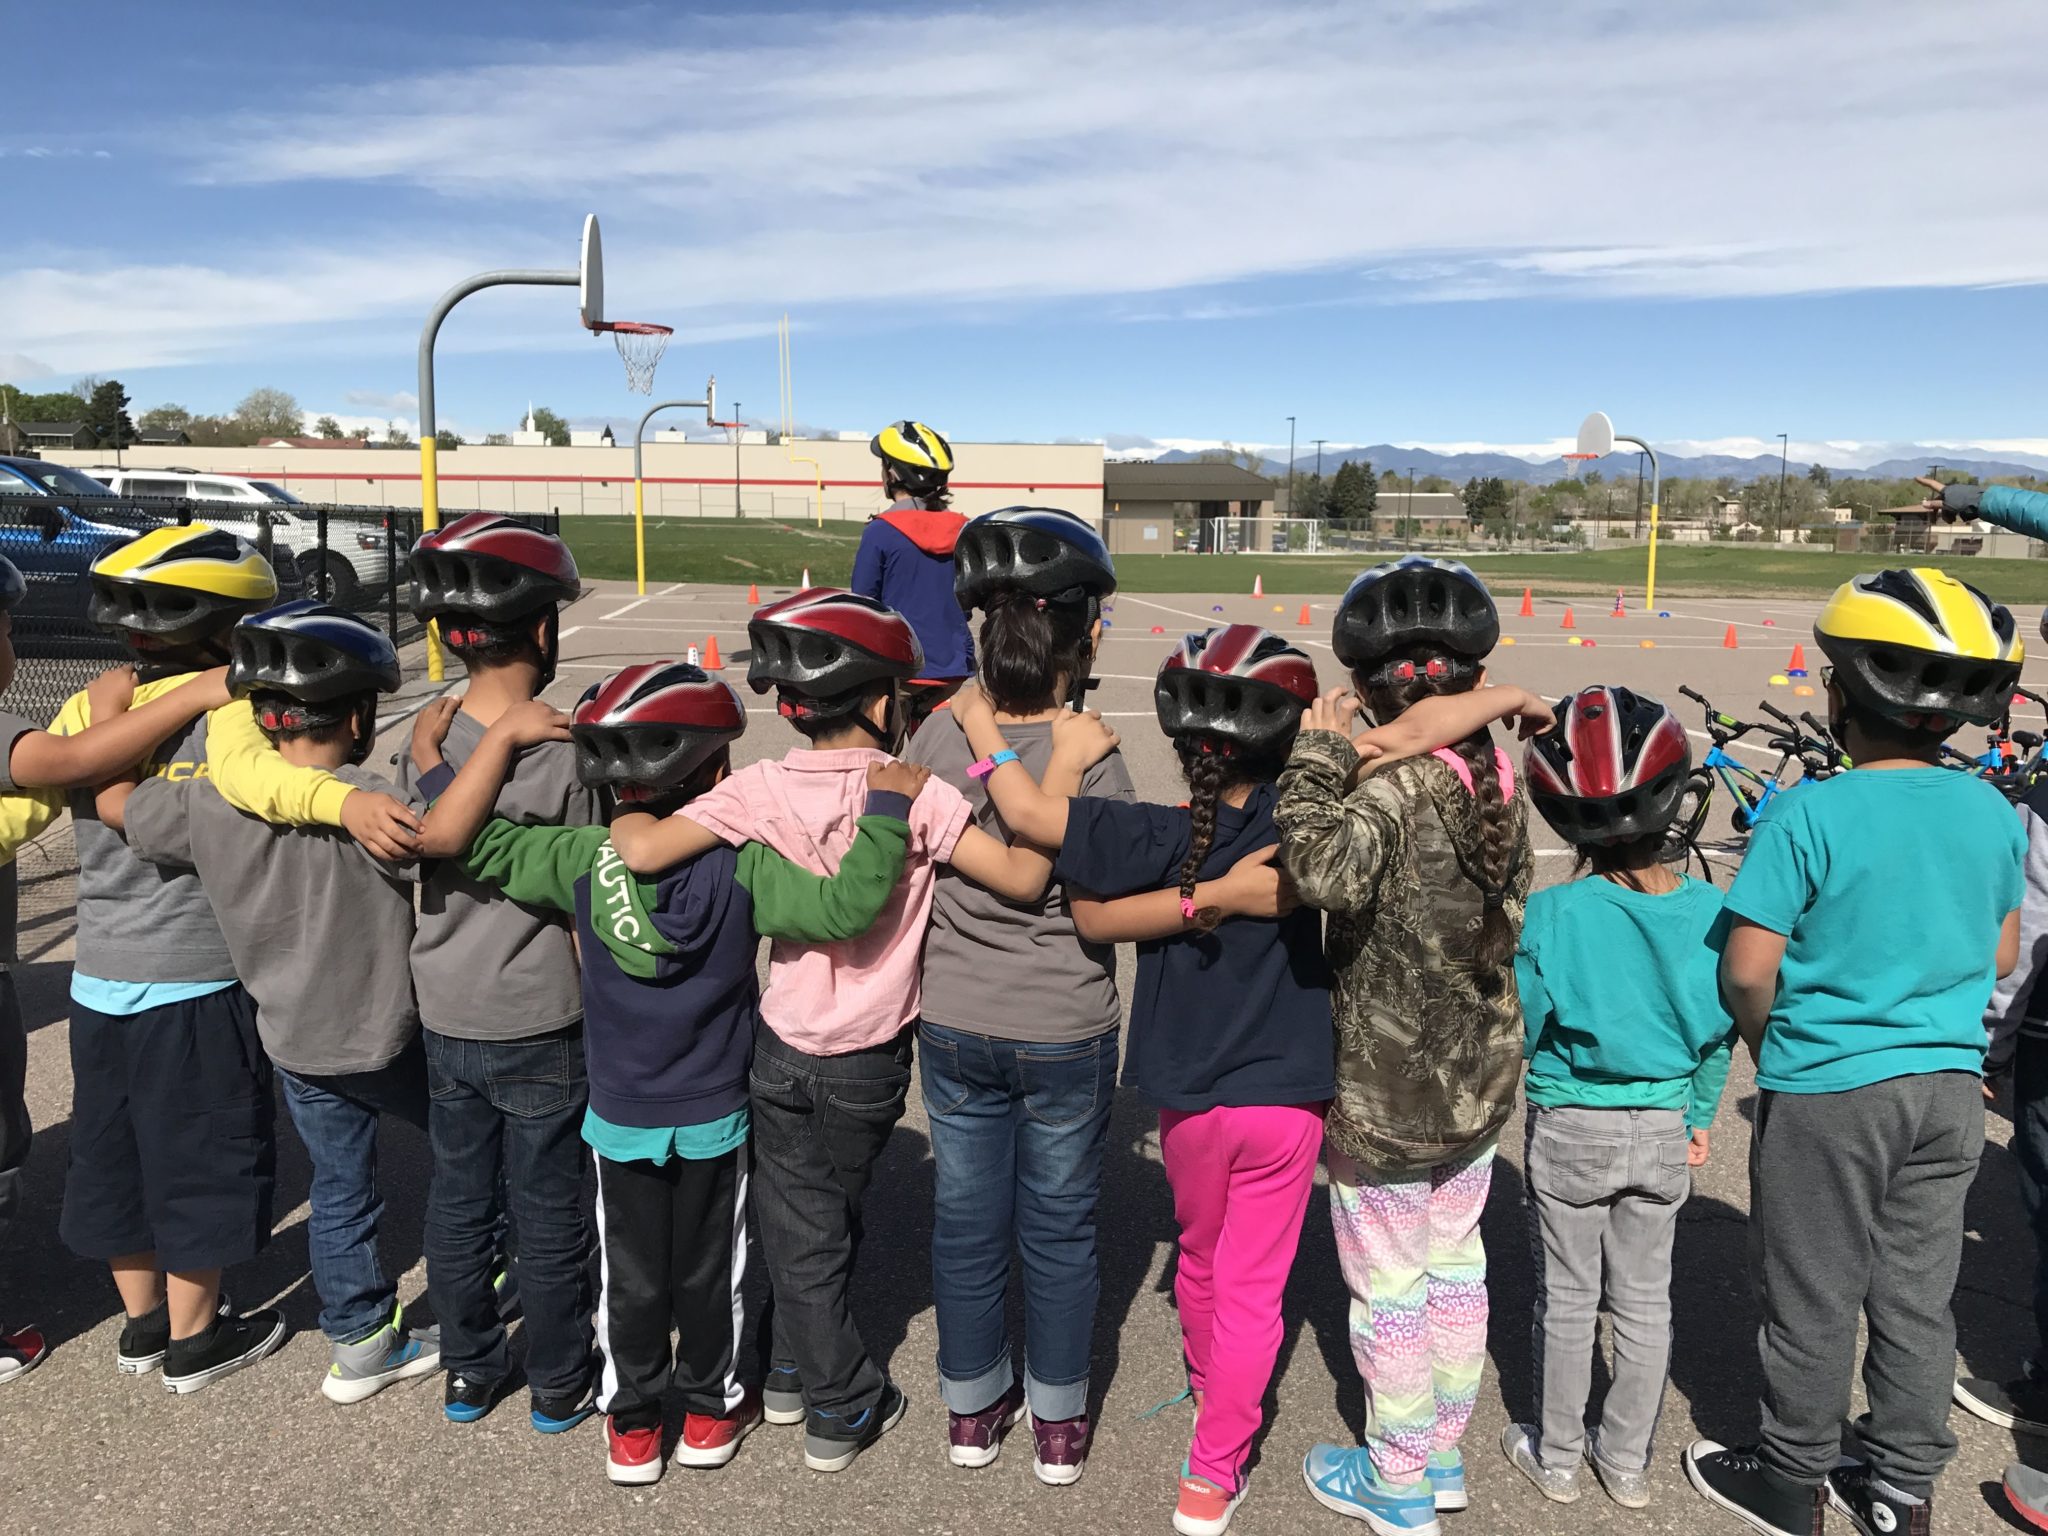 A group of children stand with their arms around each other and backs to the camera. They are wearing helmets and are in a school playground.